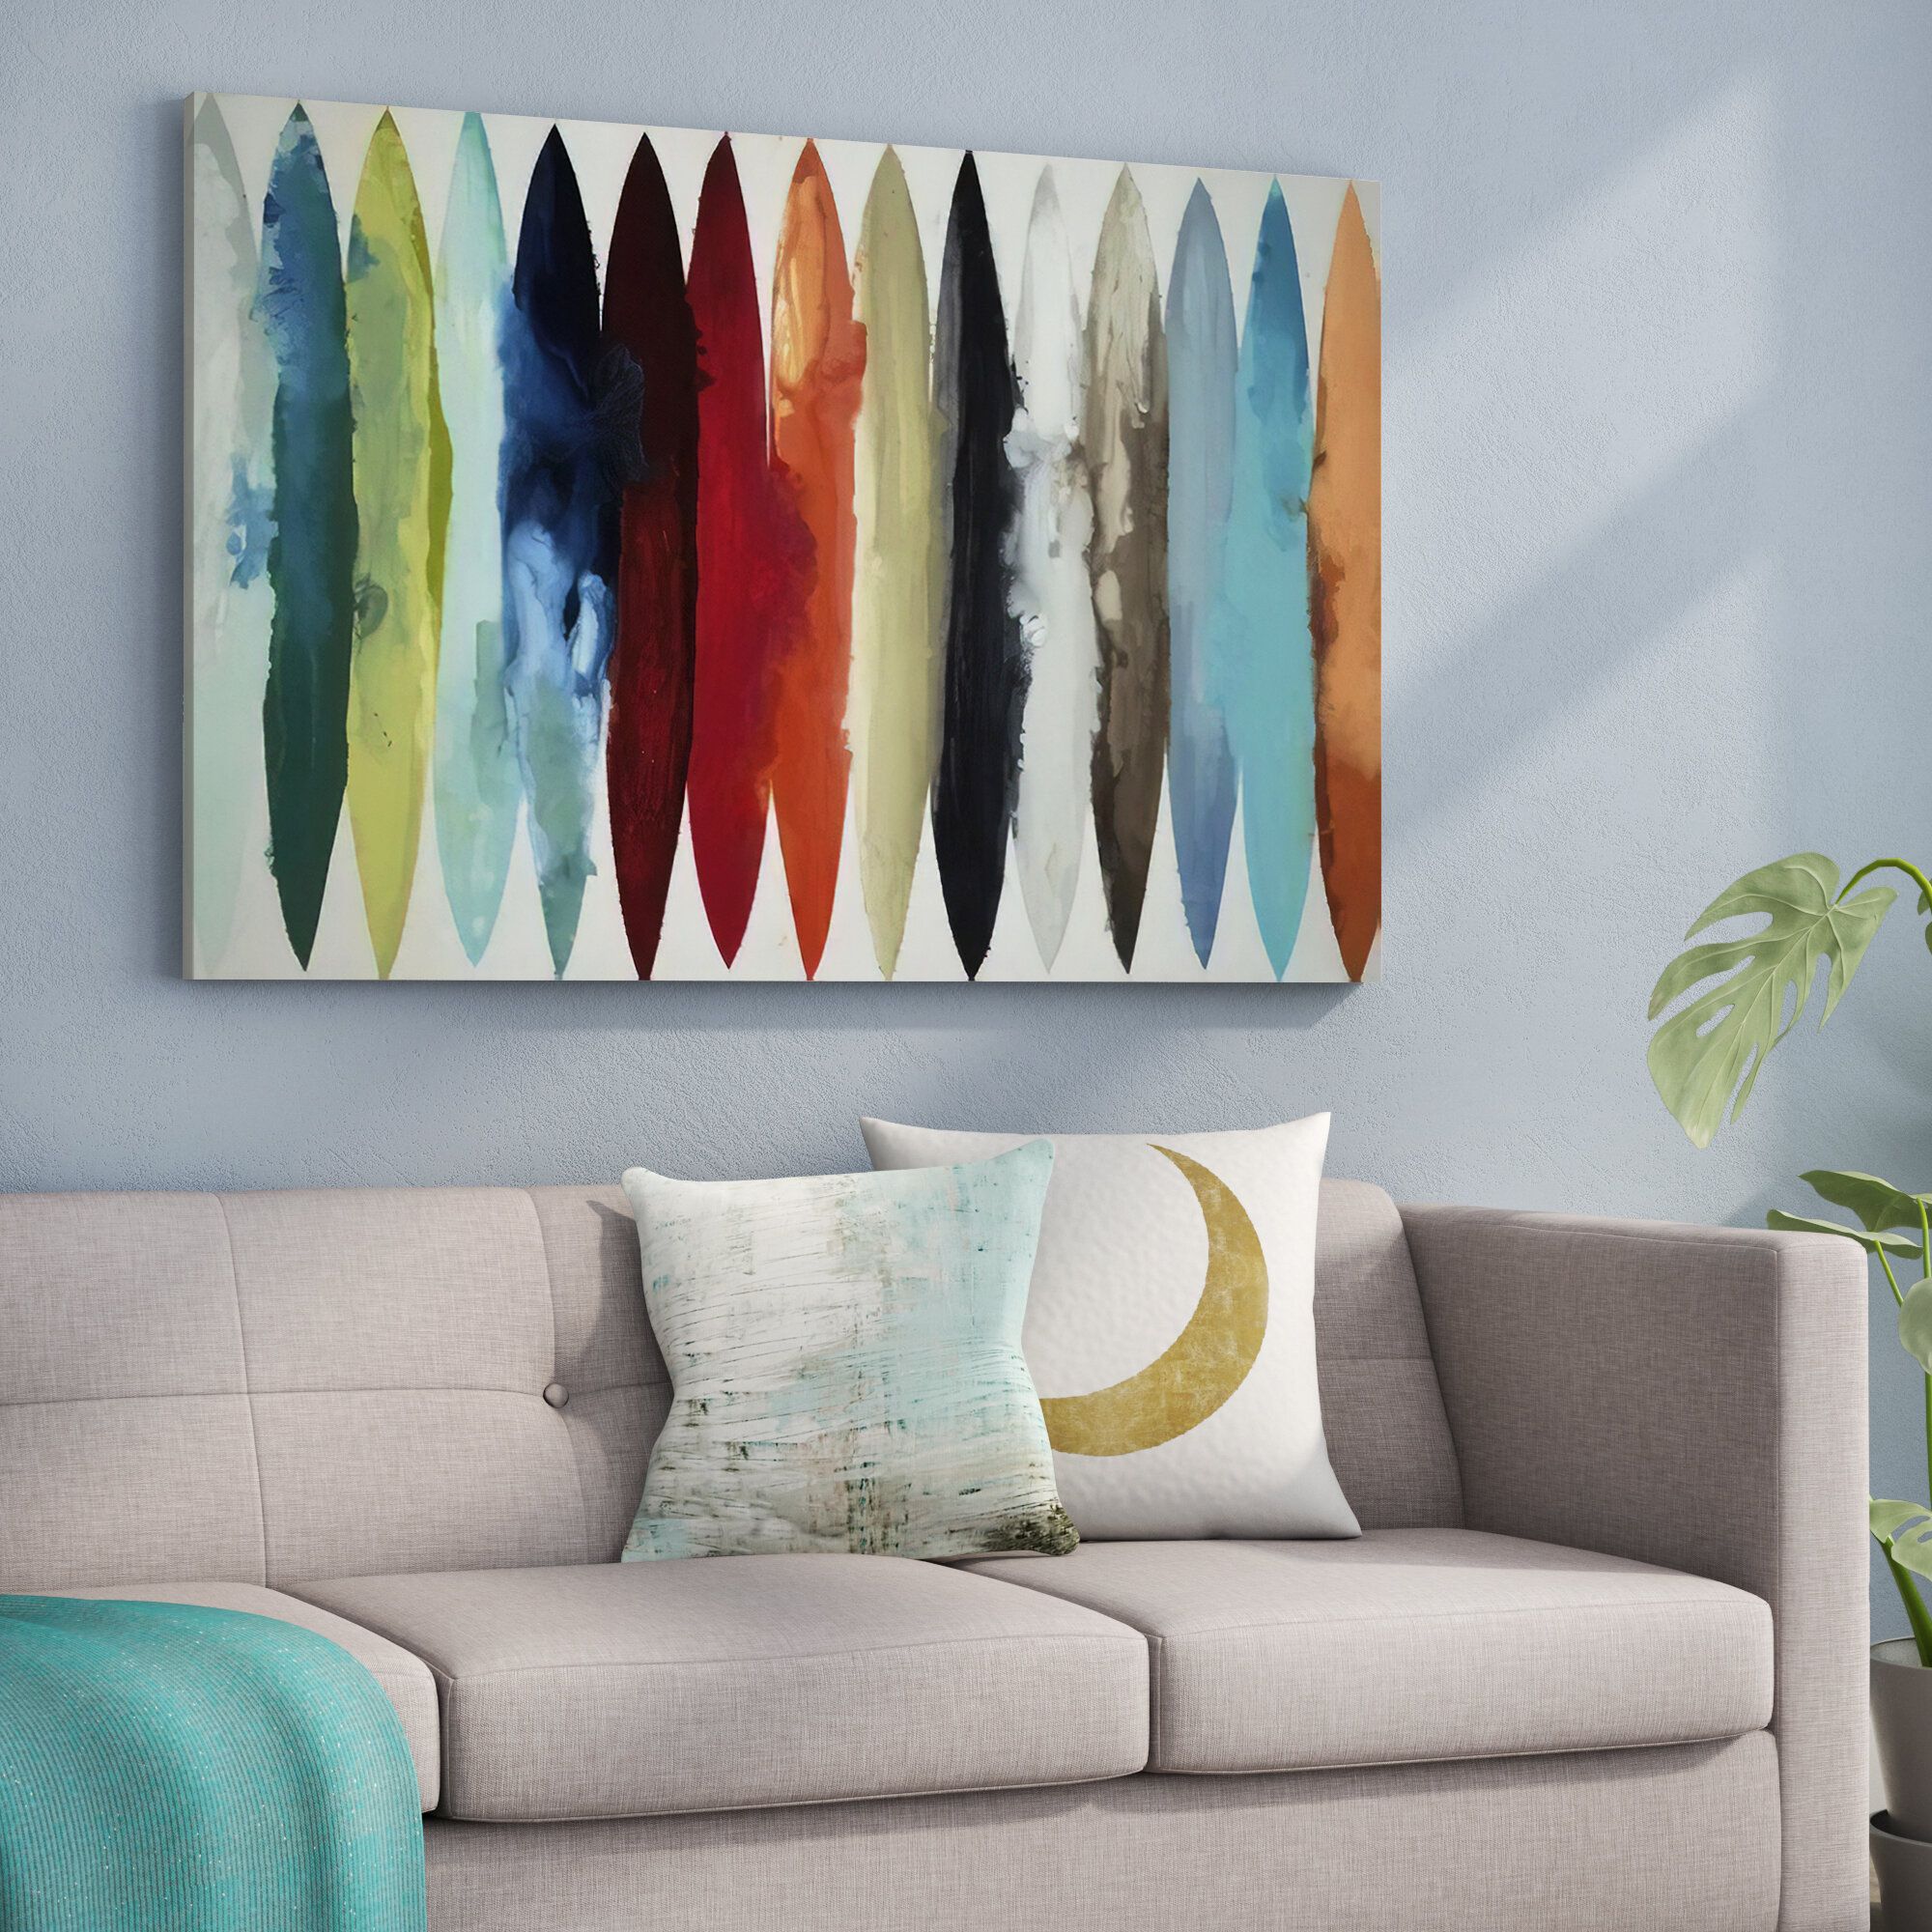 Wrought Studio Even Flowrandy Hibberd – Print & Reviews | Wayfair Pertaining To Newest Abstract Flow Wall Art (View 13 of 20)